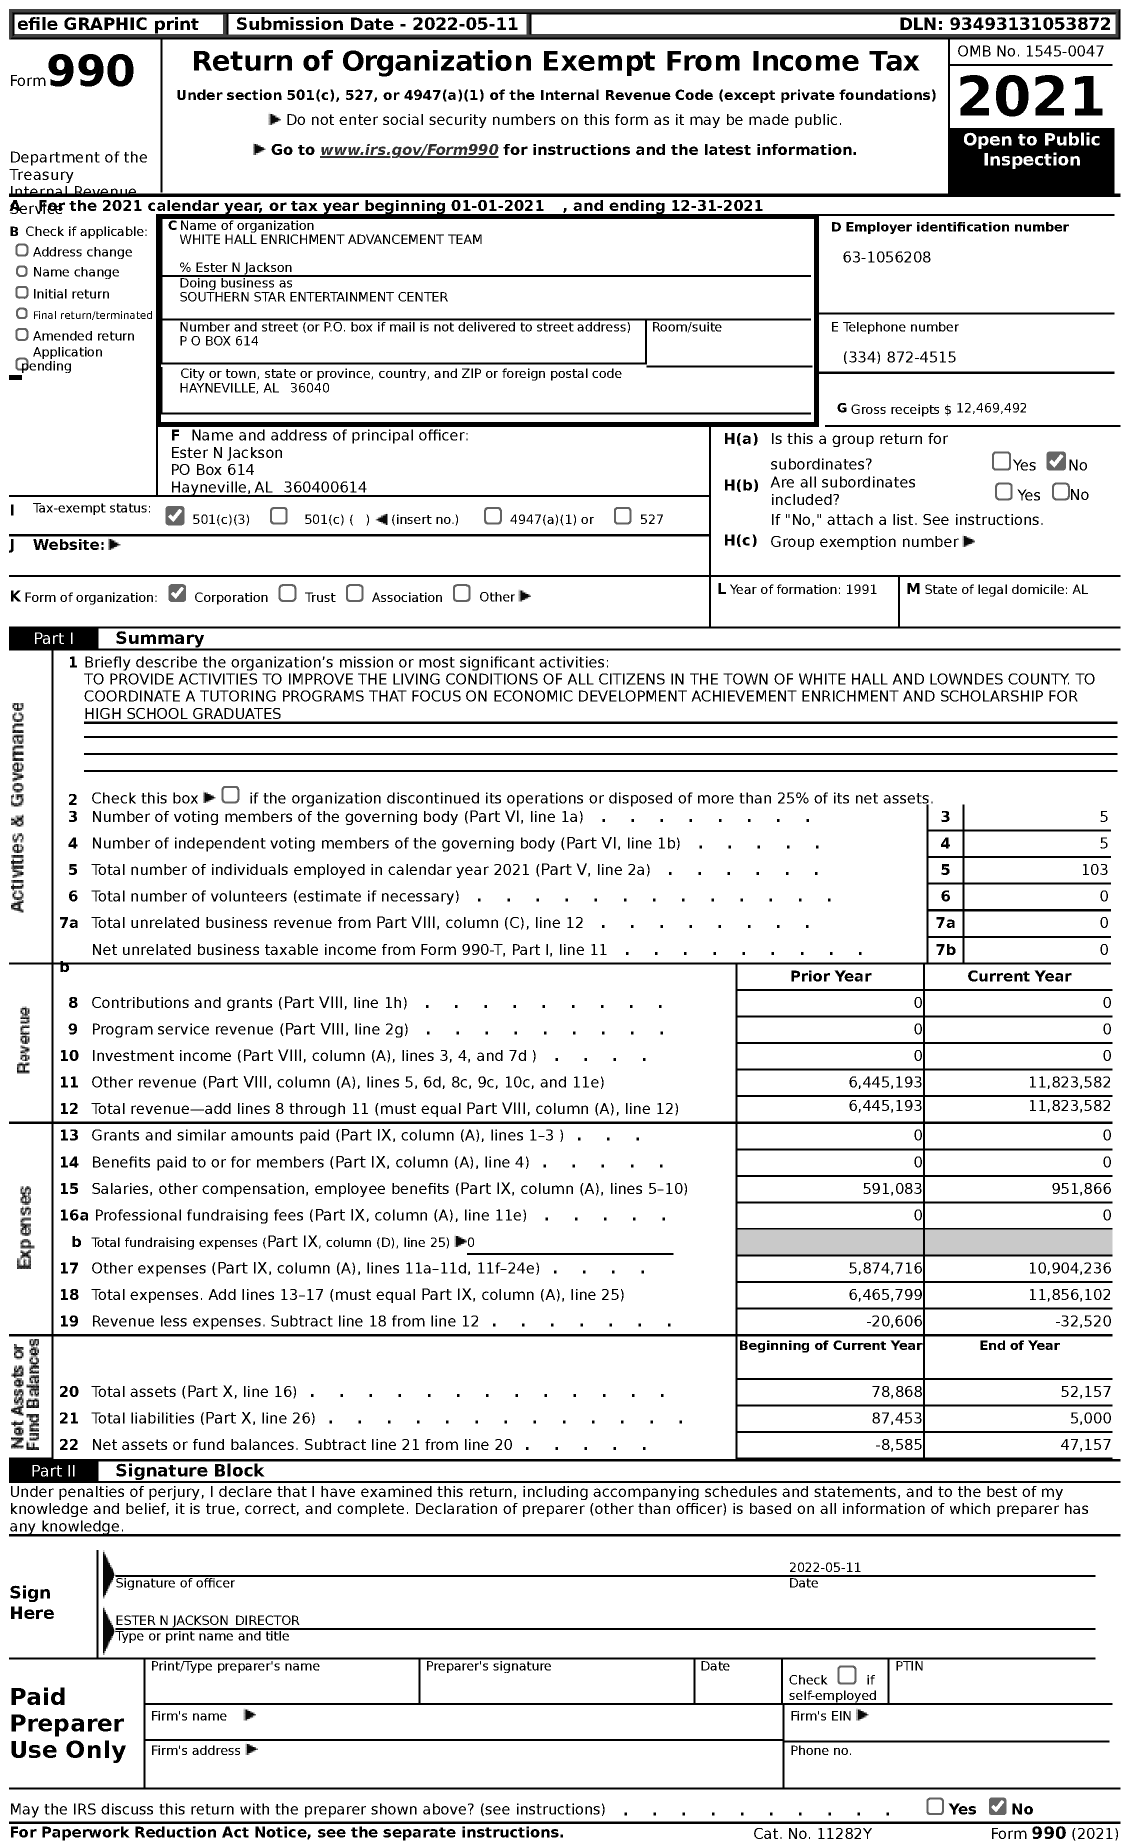 Image of first page of 2021 Form 990 for Southern Star Entertainment Center